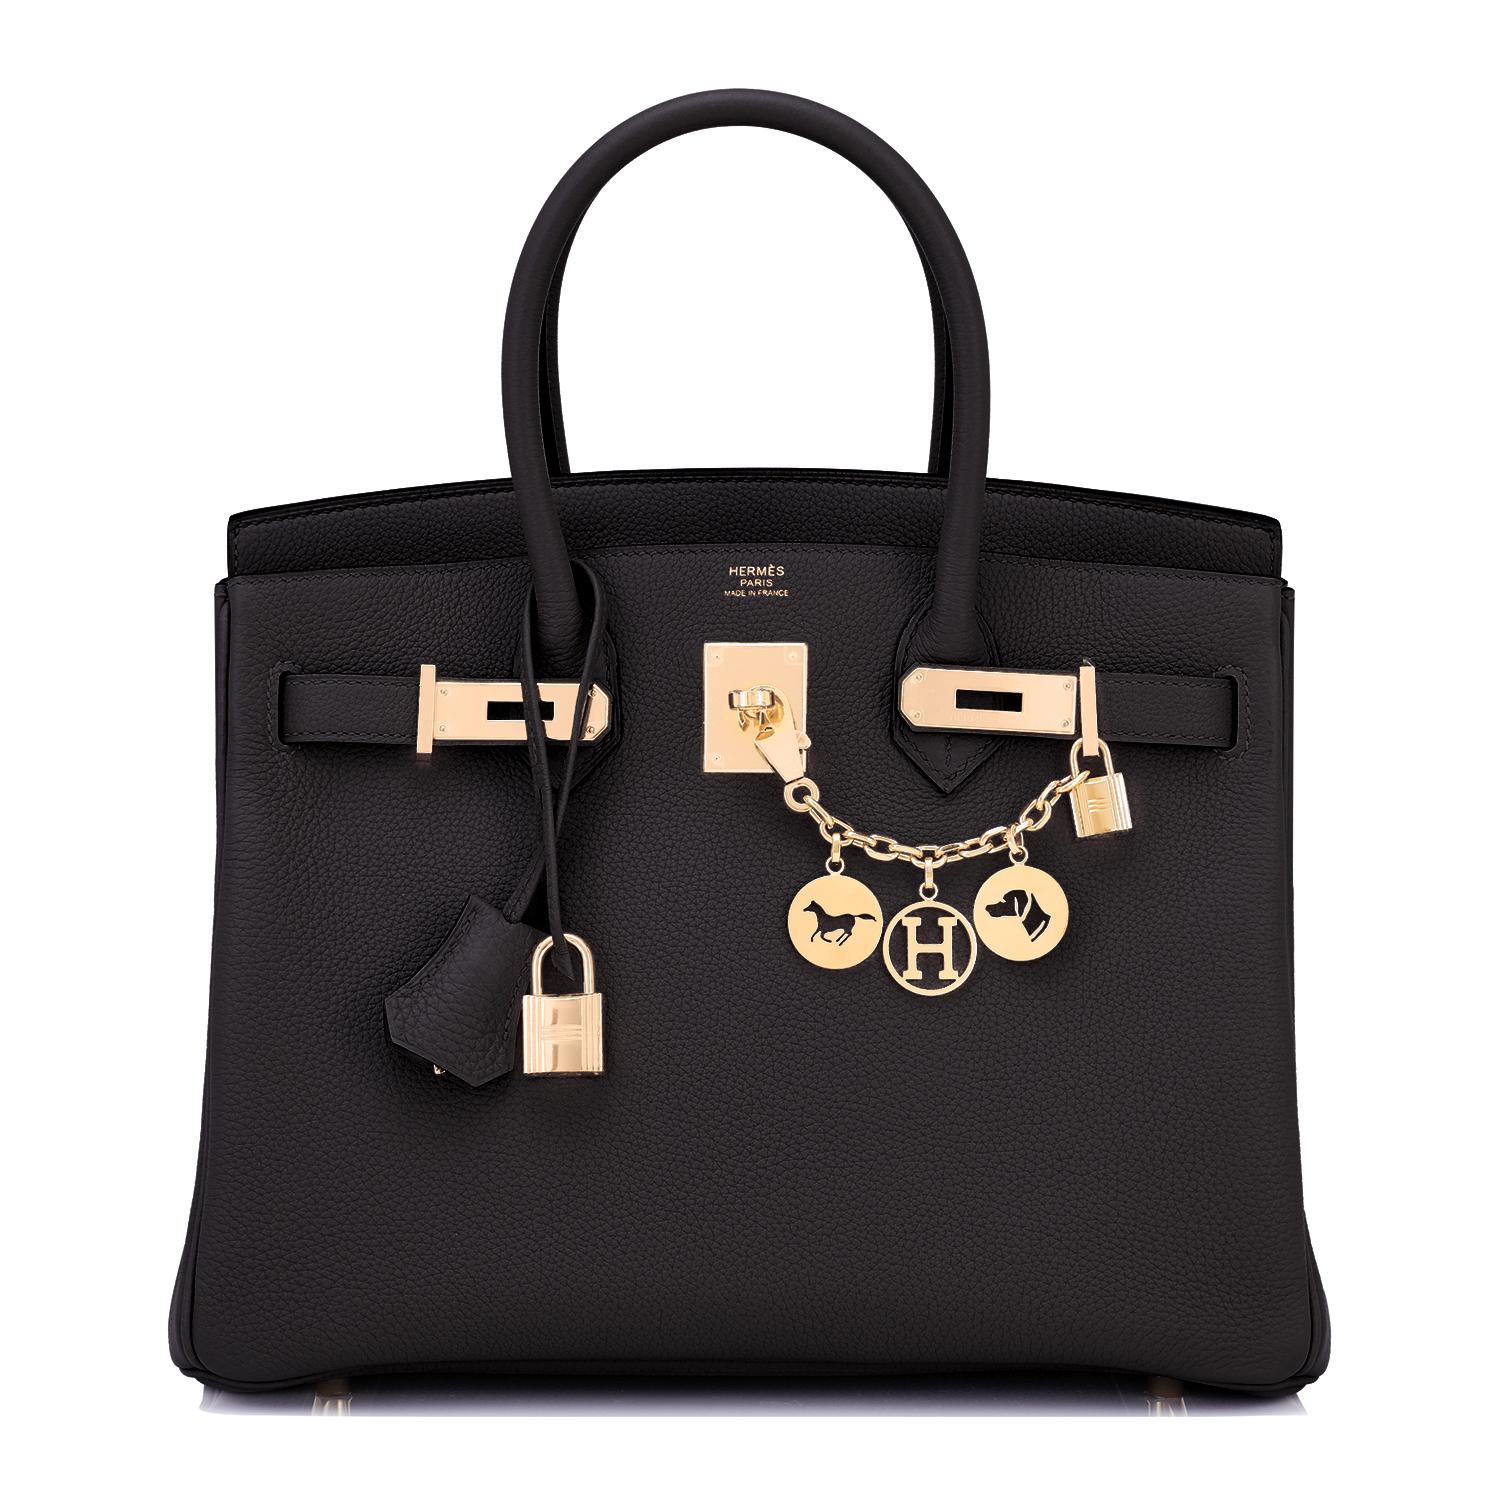 Hermes Birkin 30cm Black Togo Rose Gold Hardware Bag Z Stamp, 2021
Don't miss it- Black with Rose Gold is soooo pretty!
Just purchased from store; bag bears new 2021 interior Z stamp! 
Brand New in Box. Store Fresh. Pristine Condition (with plastic